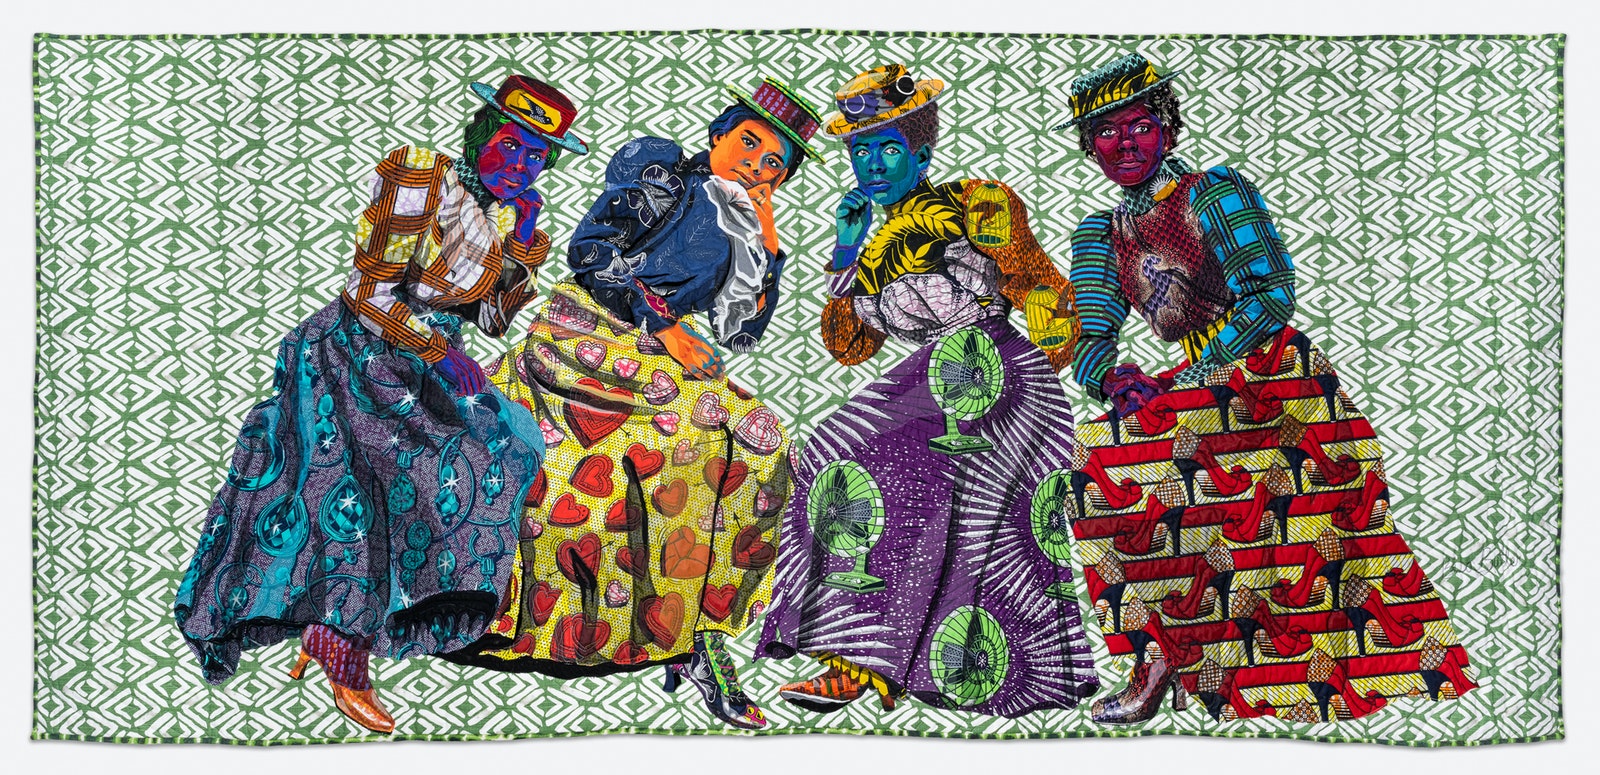 Quilted image by Bisa Butler